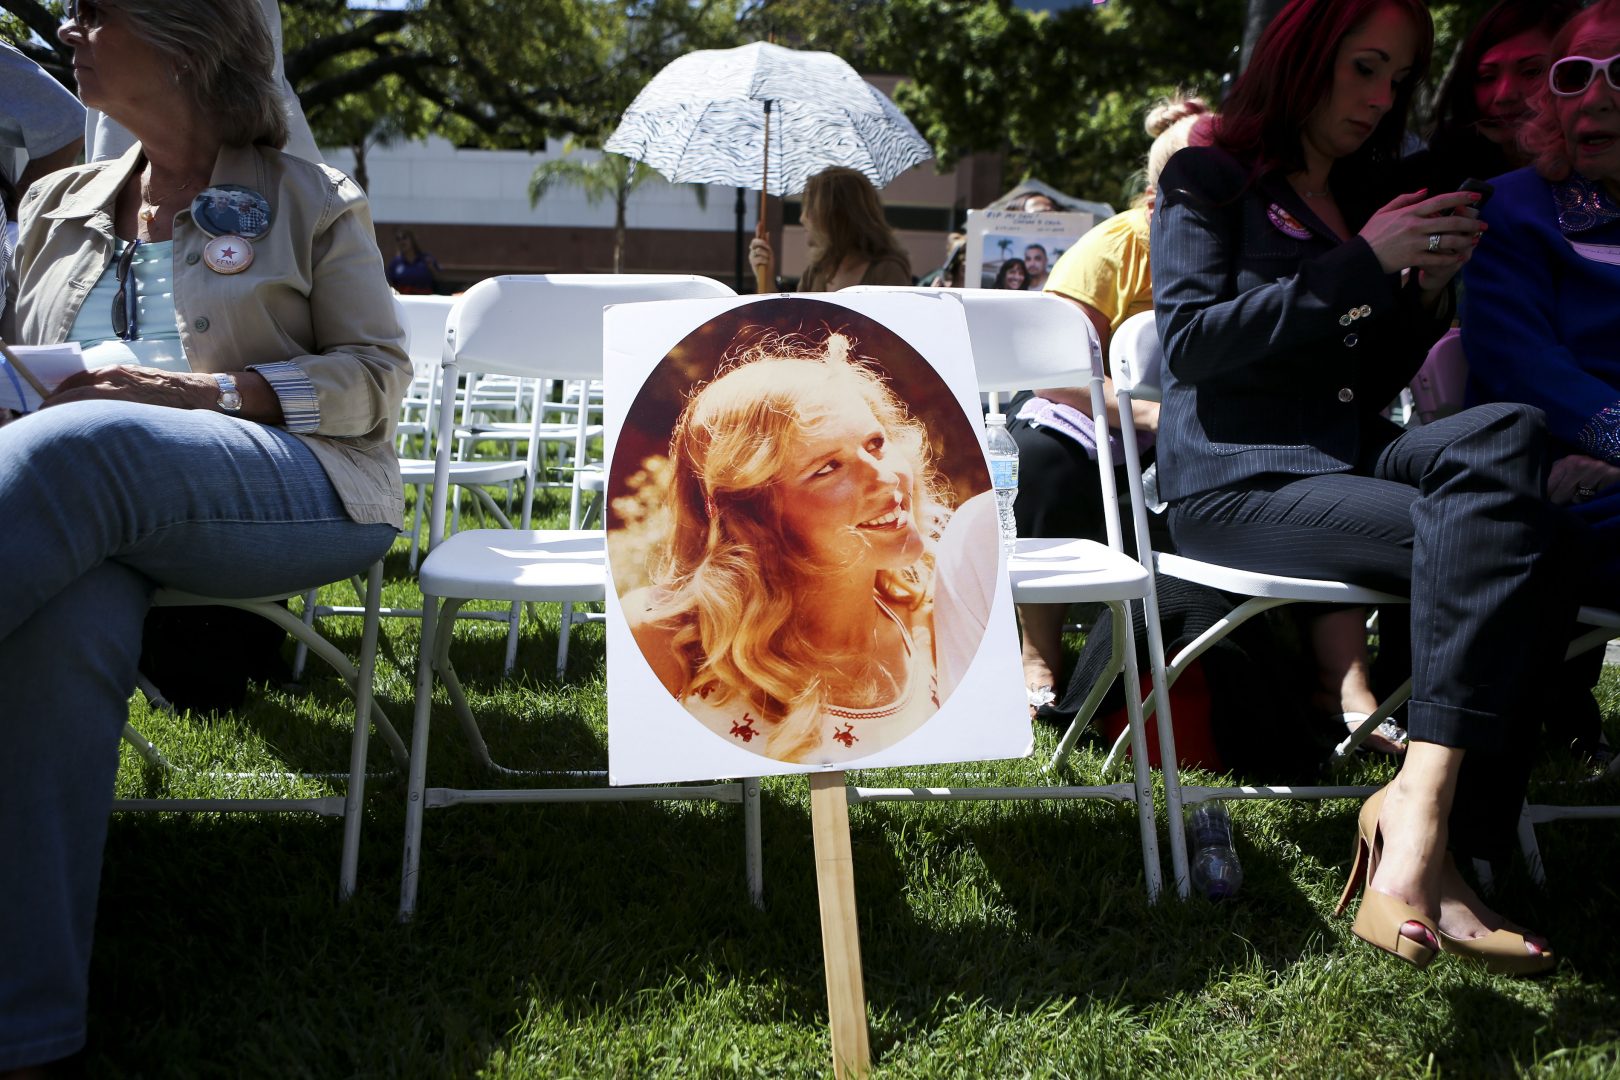 A photo of Marsy Nicholas, the namesake for victim rights legislation that has passed in several states, sits against a chair during a 2013 rally in Santa Ana, Calif. Nicholas was killed in 1983.